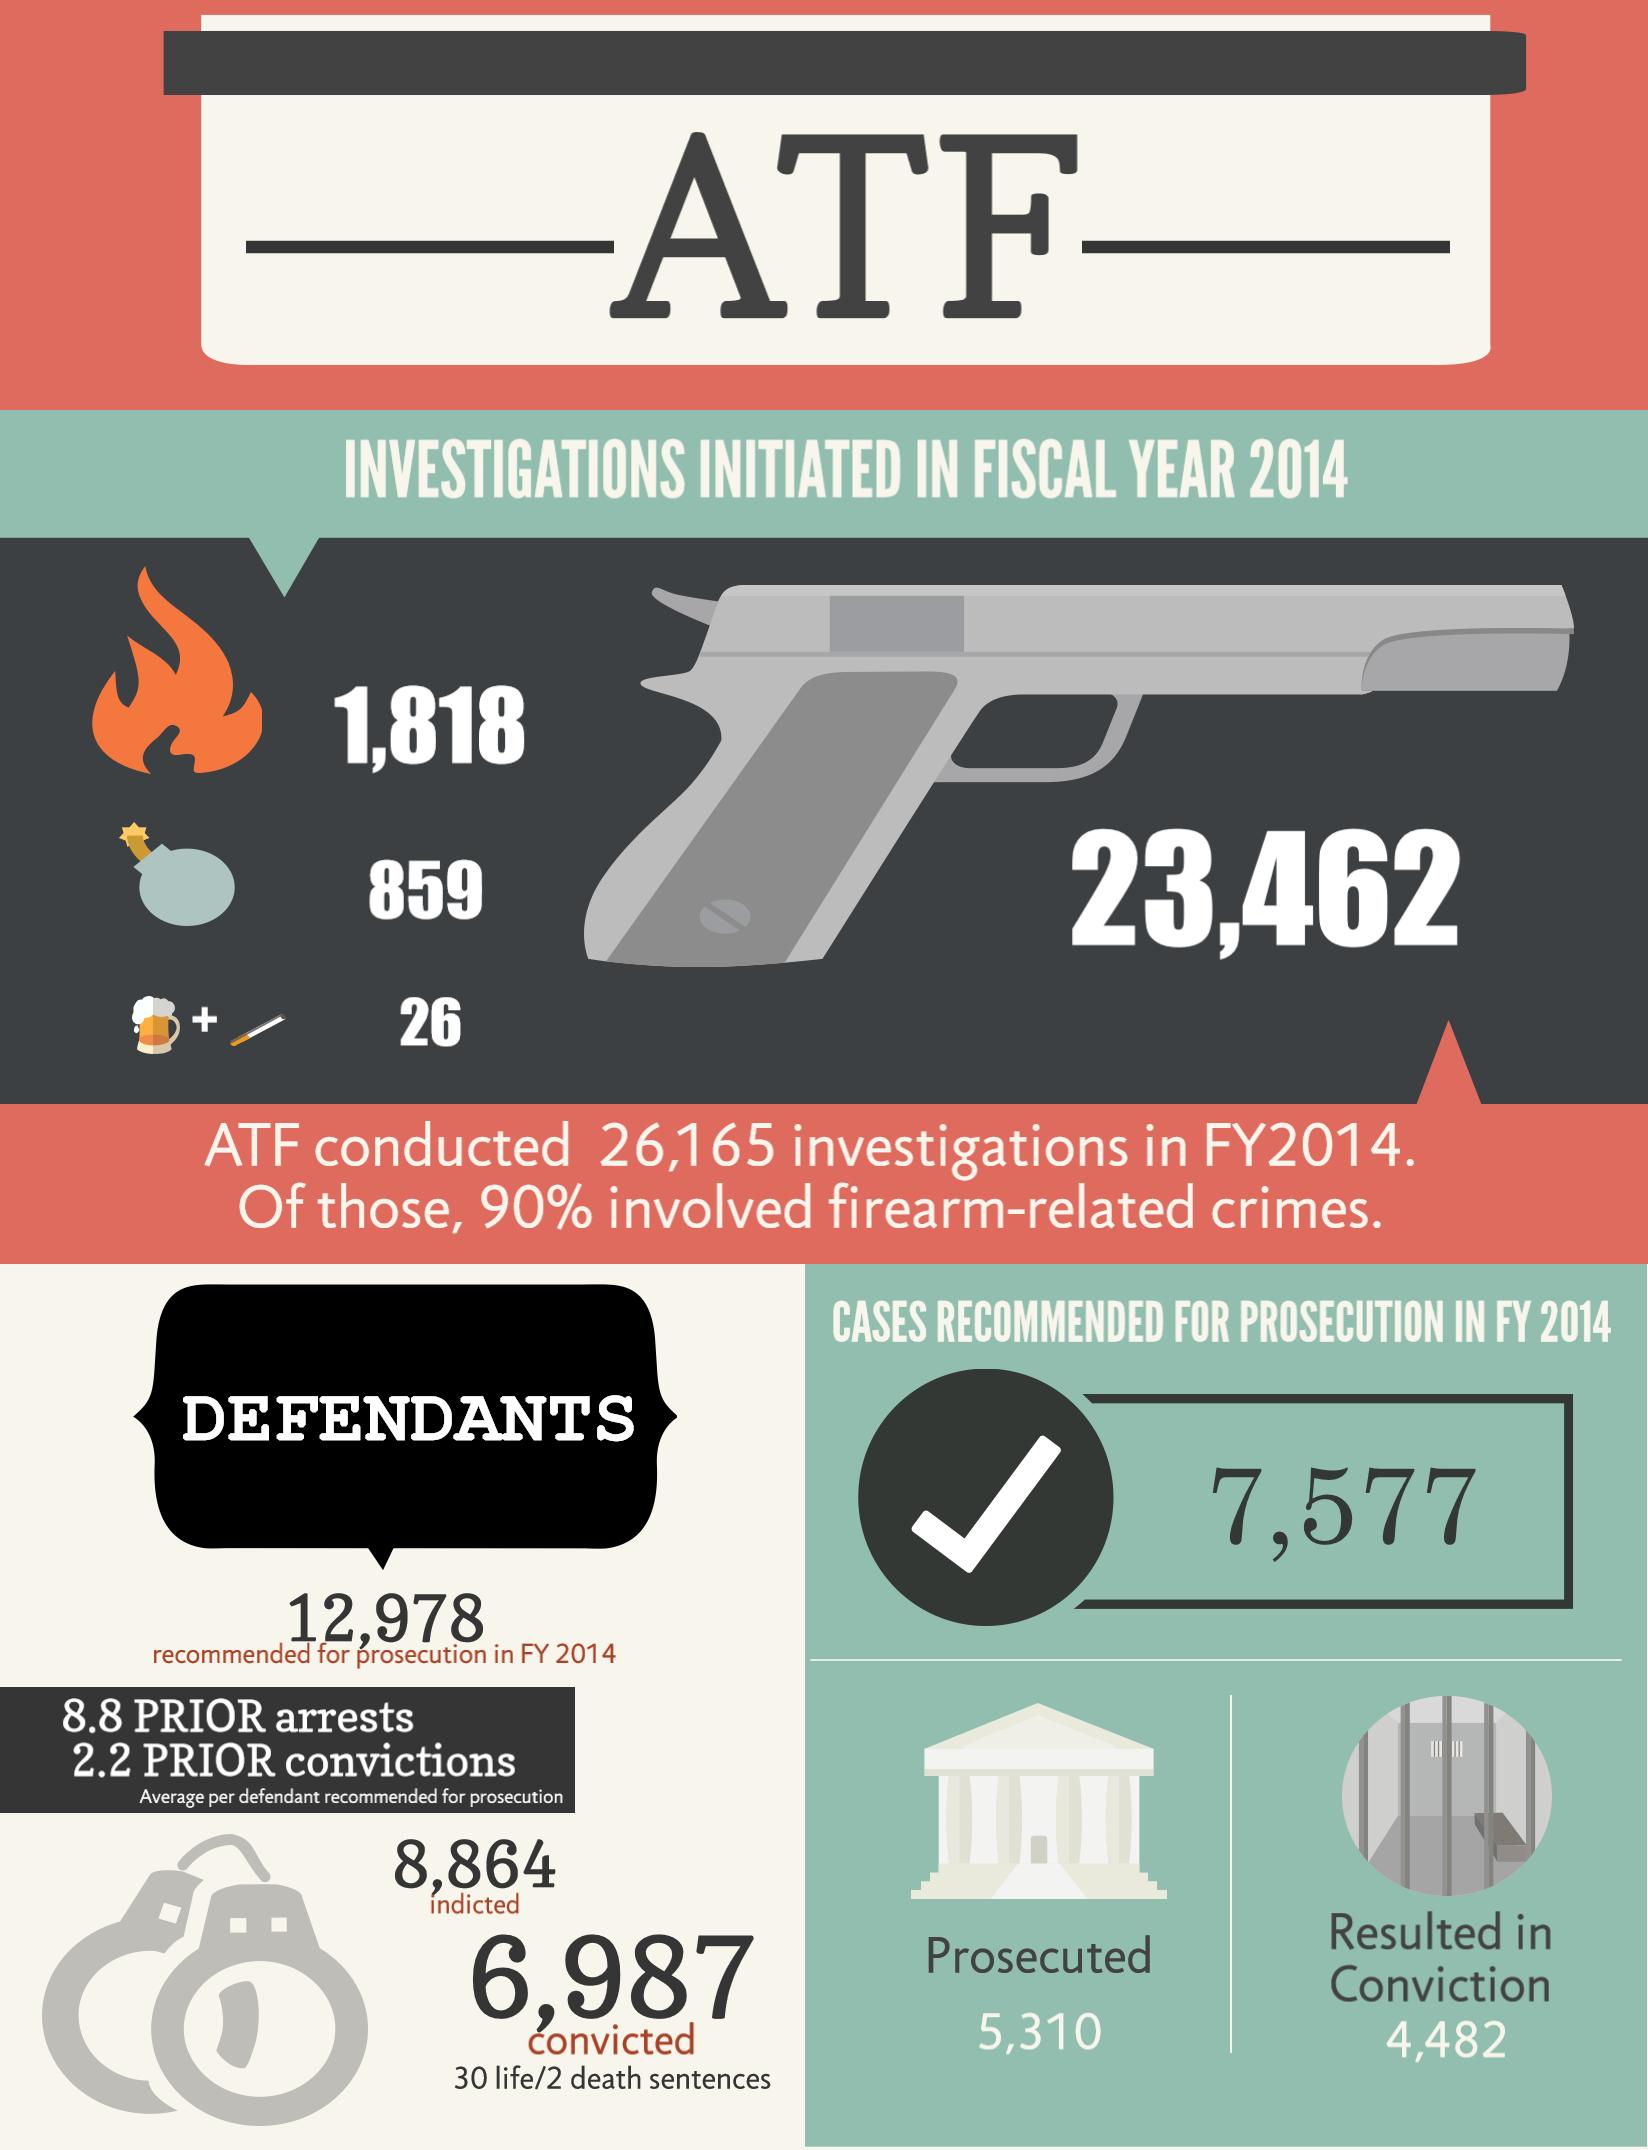 1,818 arson, 859 explosives and 26 alcohol and tobacco and 23,462 firearms related ATF Investigations were initiated in fiscal year 2014. ATF conducted 26,165 investigation in FY2014 of those, 90% involved firearm-related crimes.